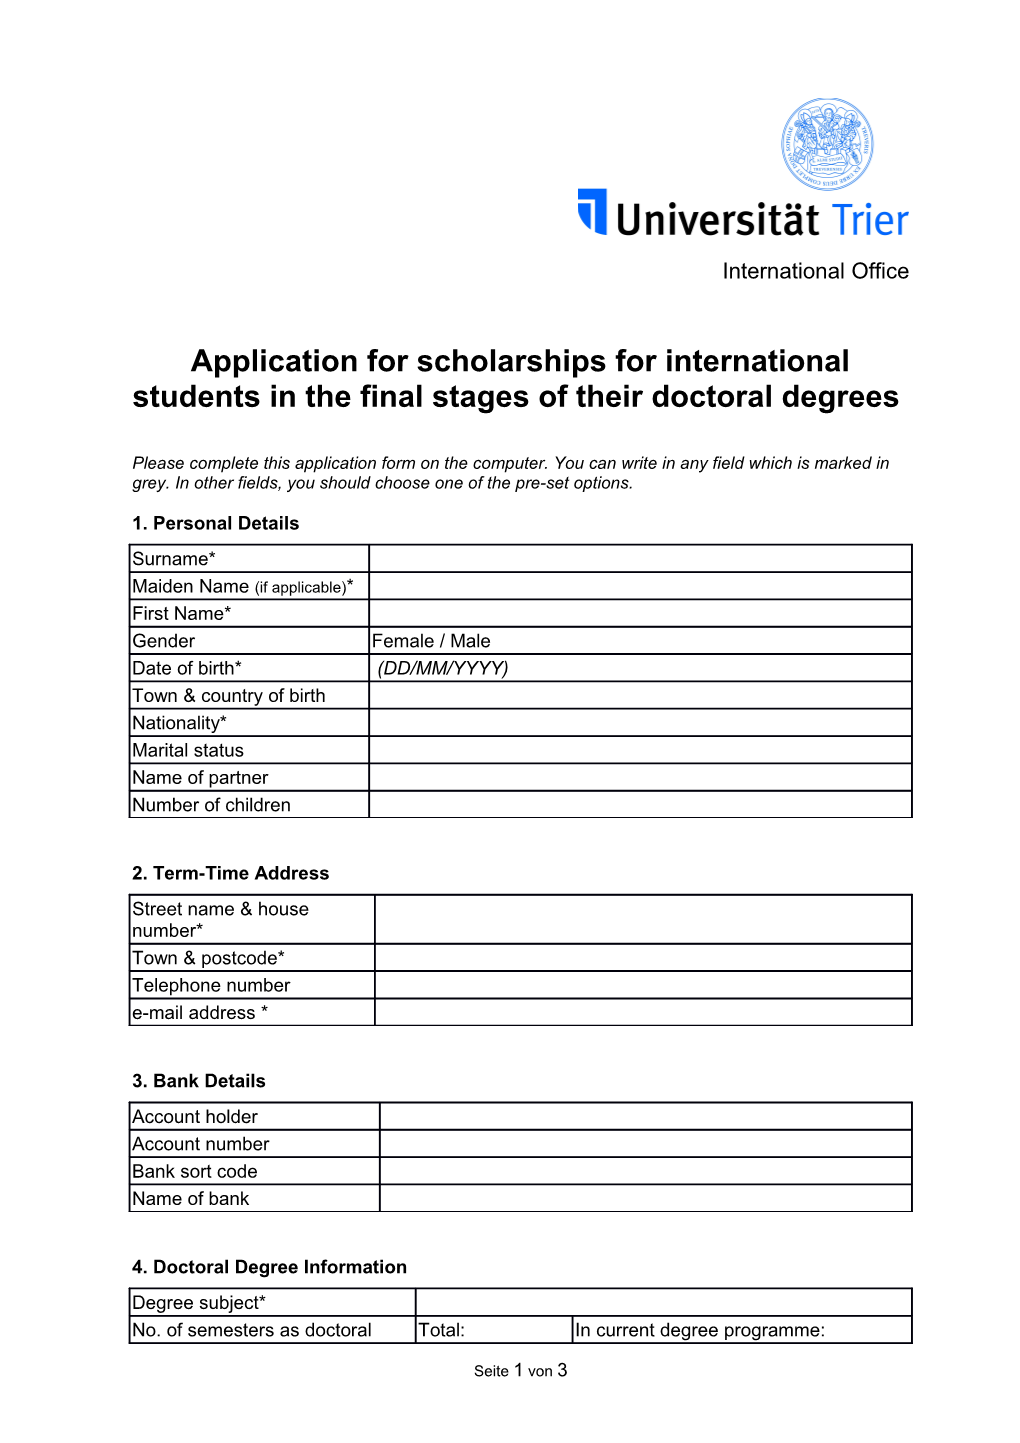 Application for Scholarships for International Students in the Final Stages of Their Doctoral